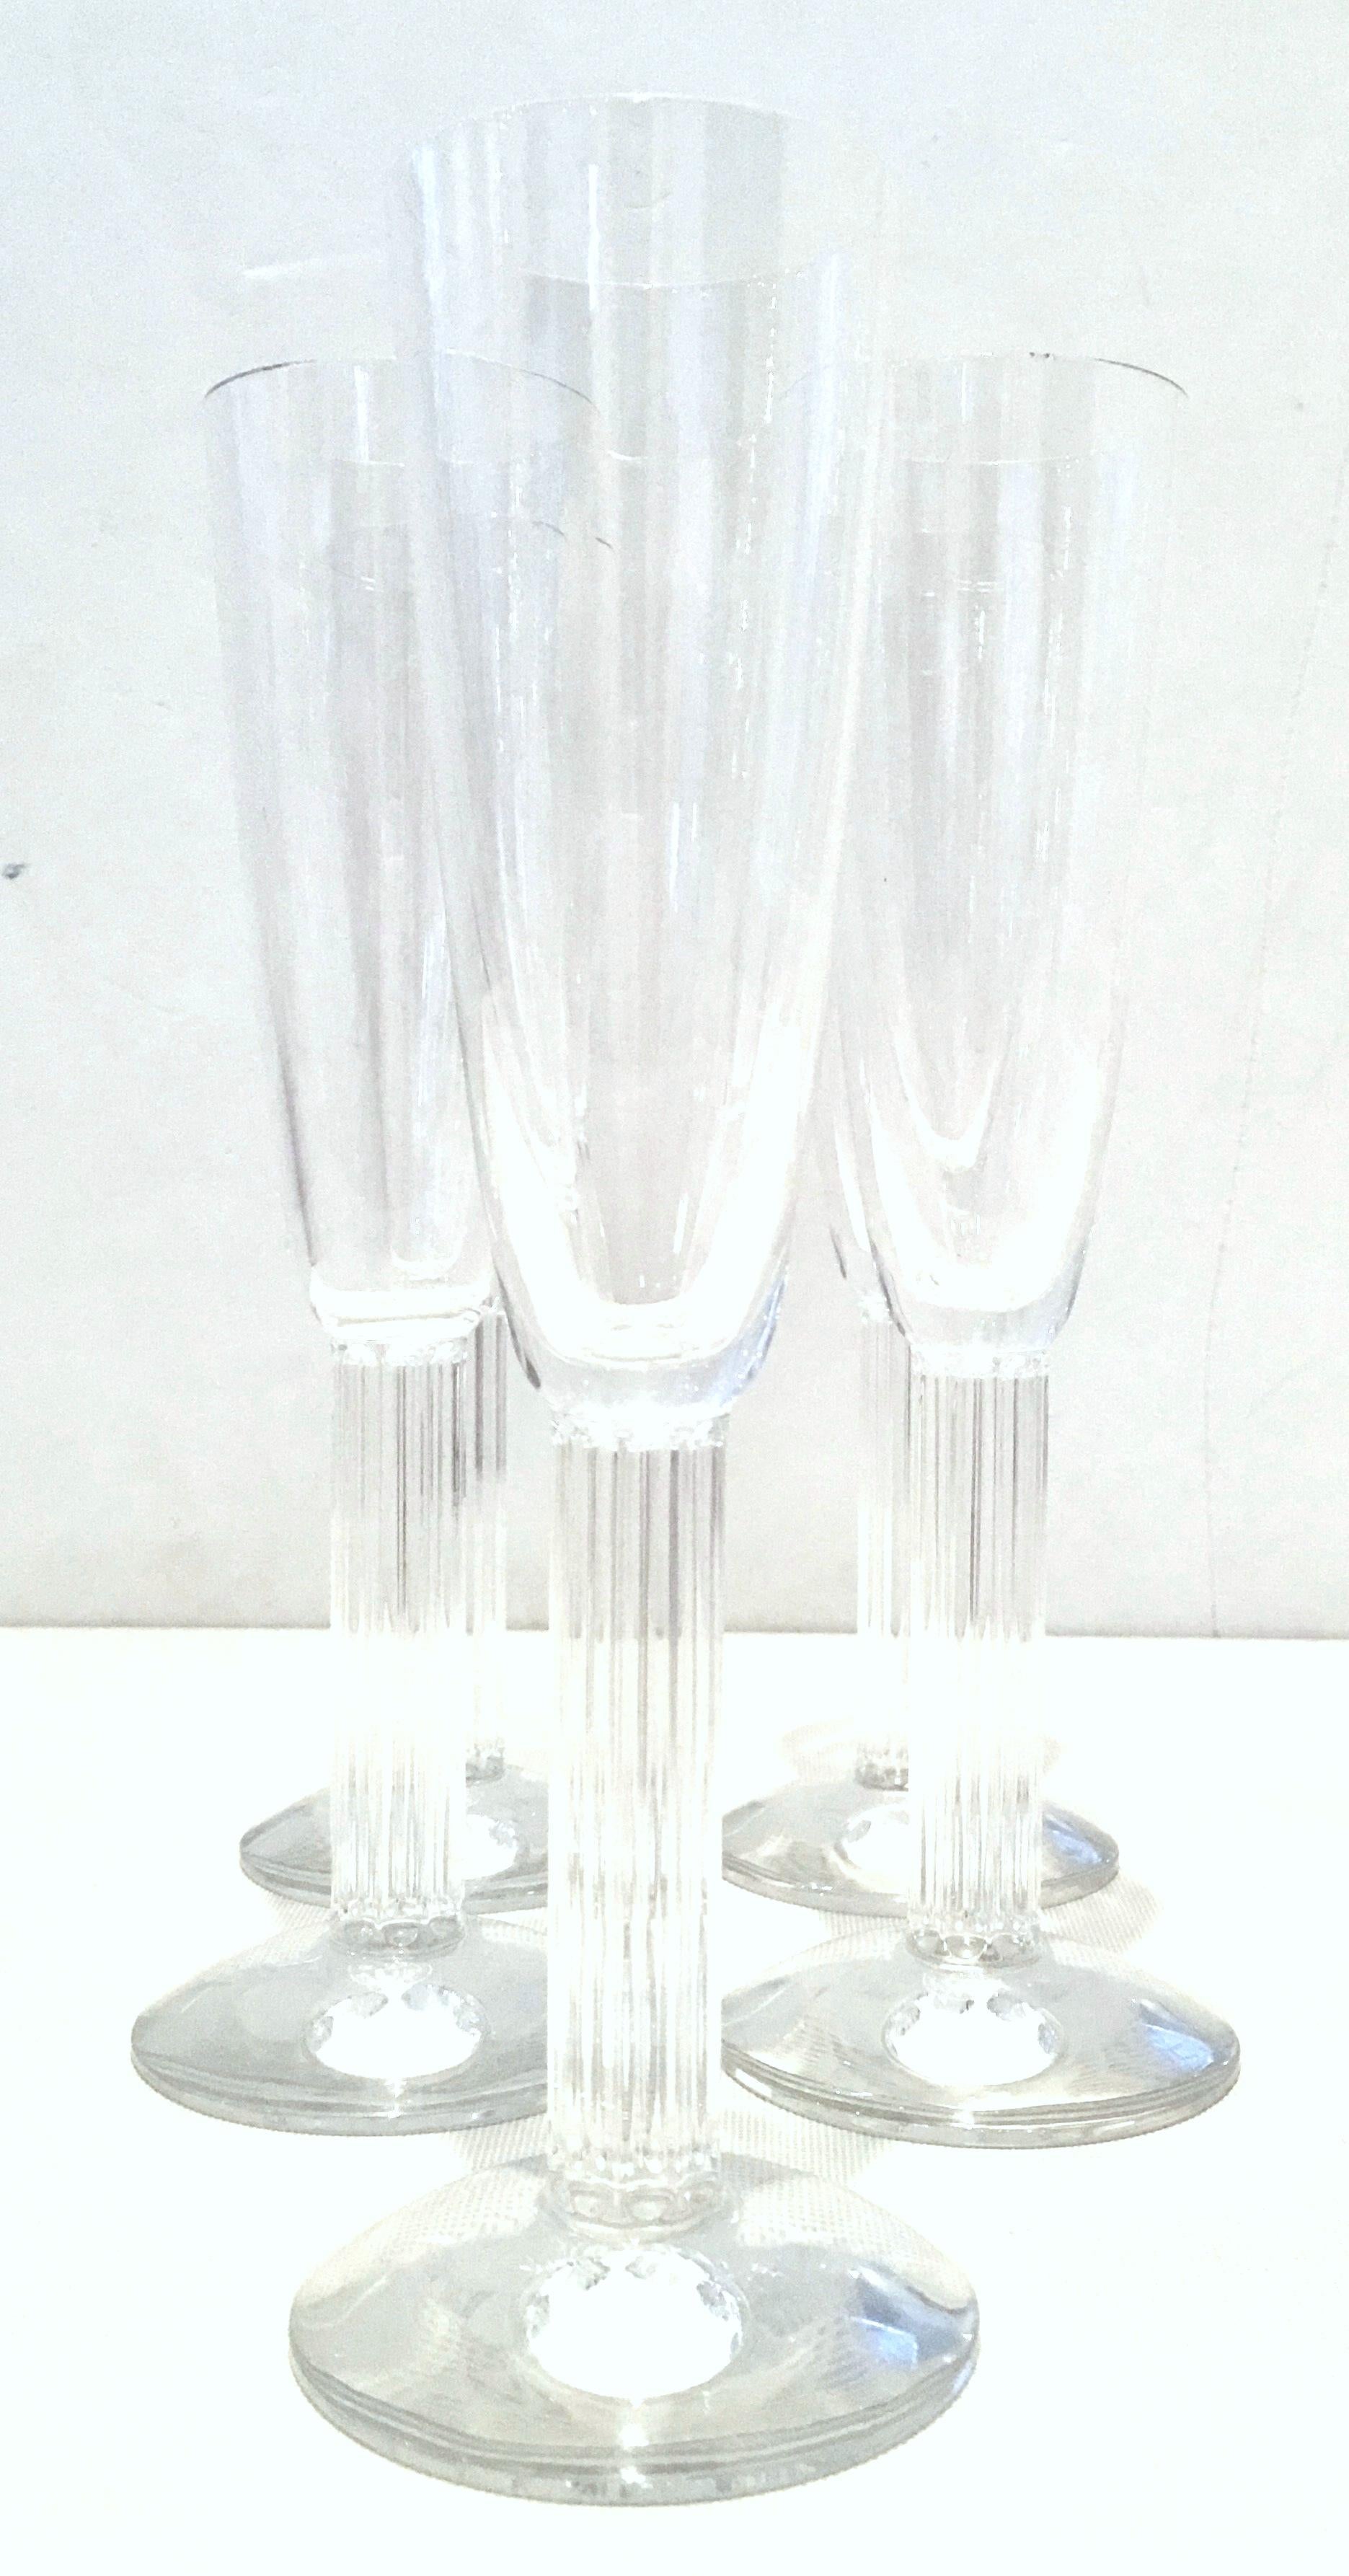 20th Century Baccarat France crystal Champagne footed flute stem glasses, 